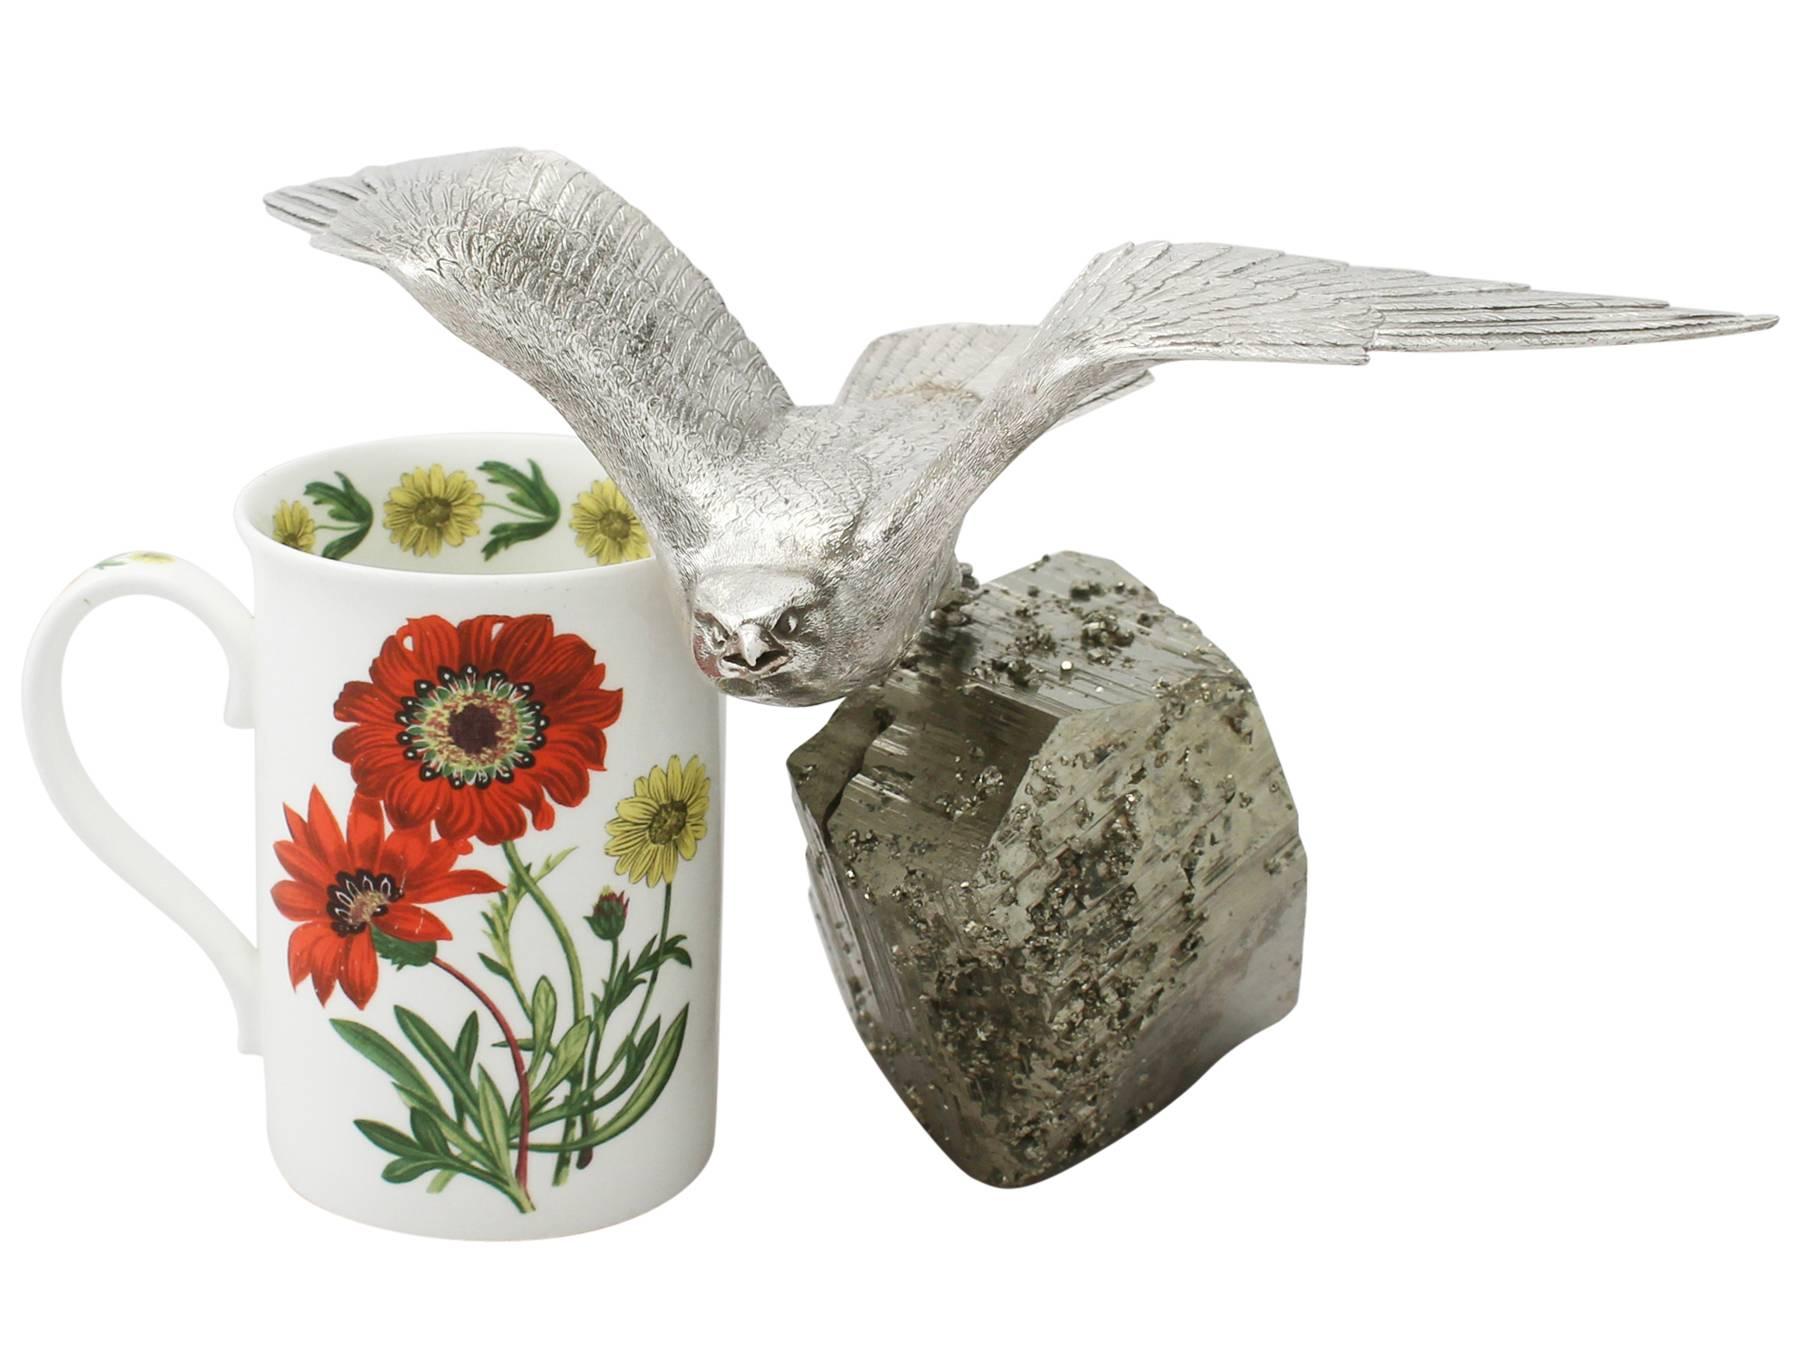 An exceptional, fine and impressive vintage Elizabeth II English cast sterling silver kestrel ornament with an iron pyrite base; an addition to our animal related silverware collection

This exceptional vintage Elizabeth II cast sterling silver